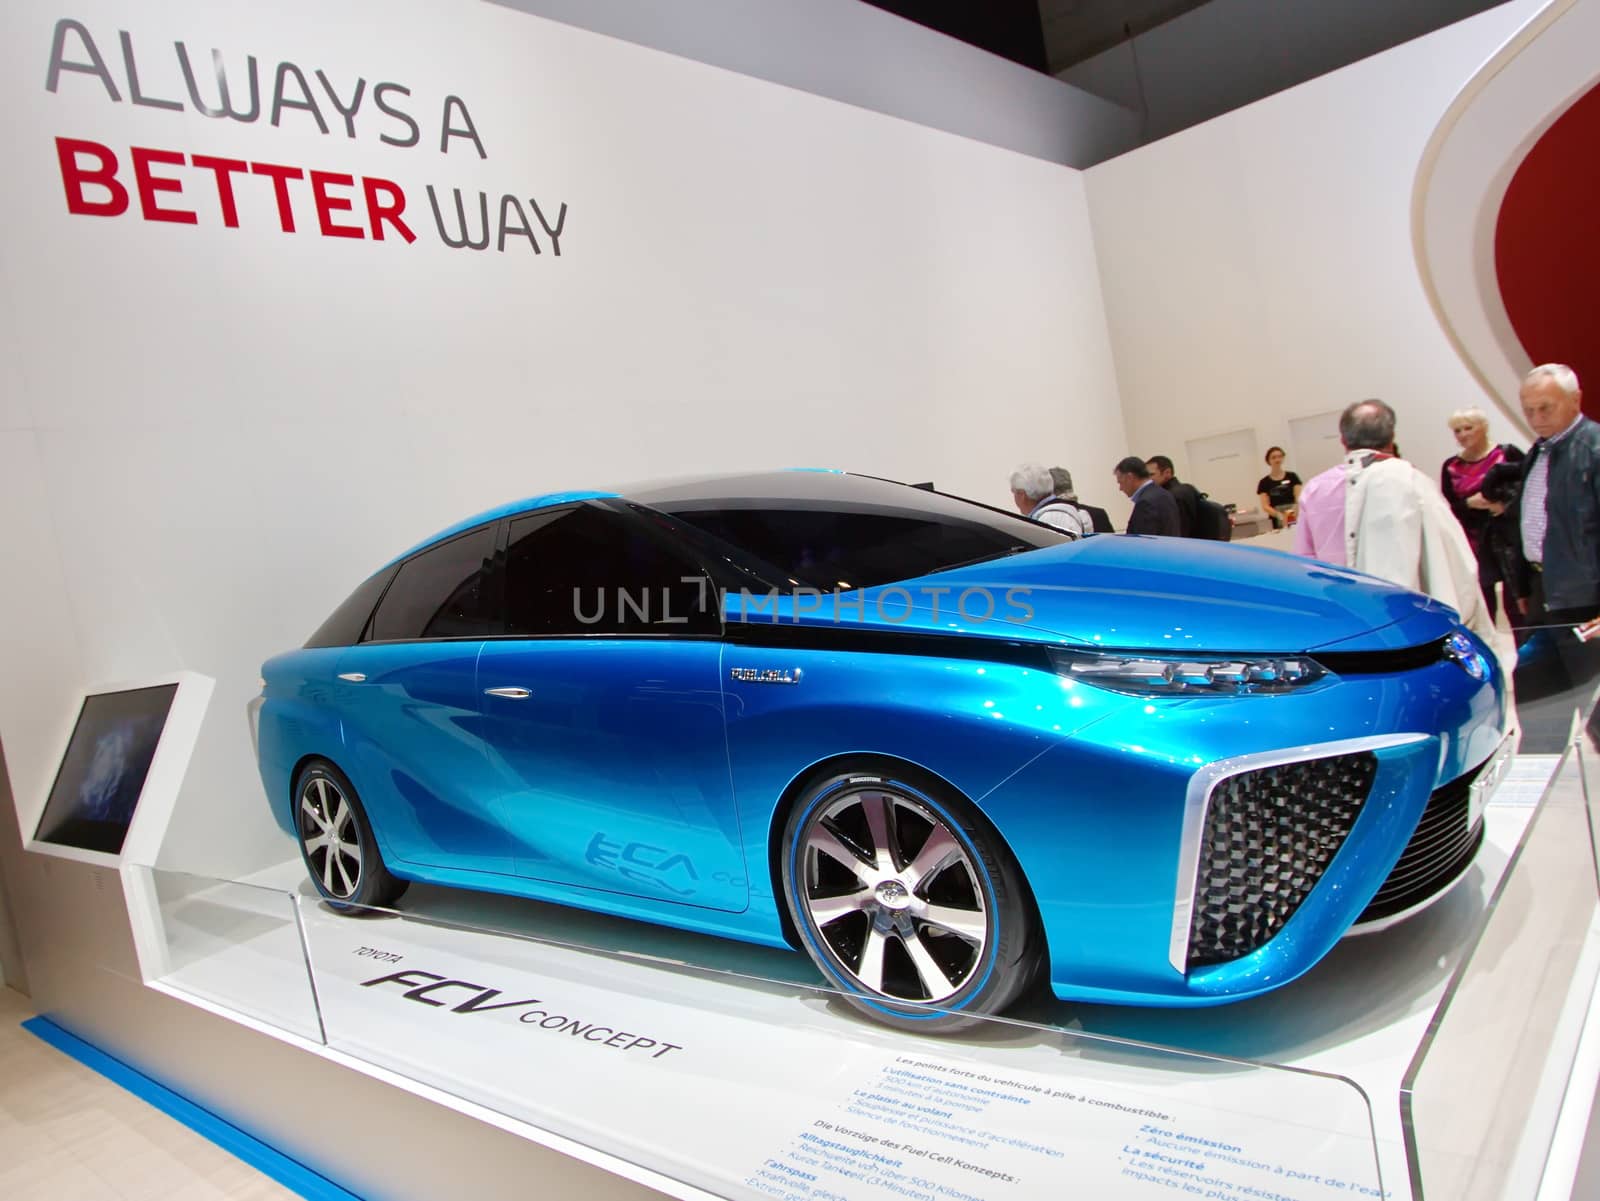 GENEVA - MARCH 13 : blue FCV (Fuel Cell Vehicle) Toyota concept on display at the 84th International Motor Show Palexpo - Geneva on March 13, 2014 in Geneva, Switzerland.